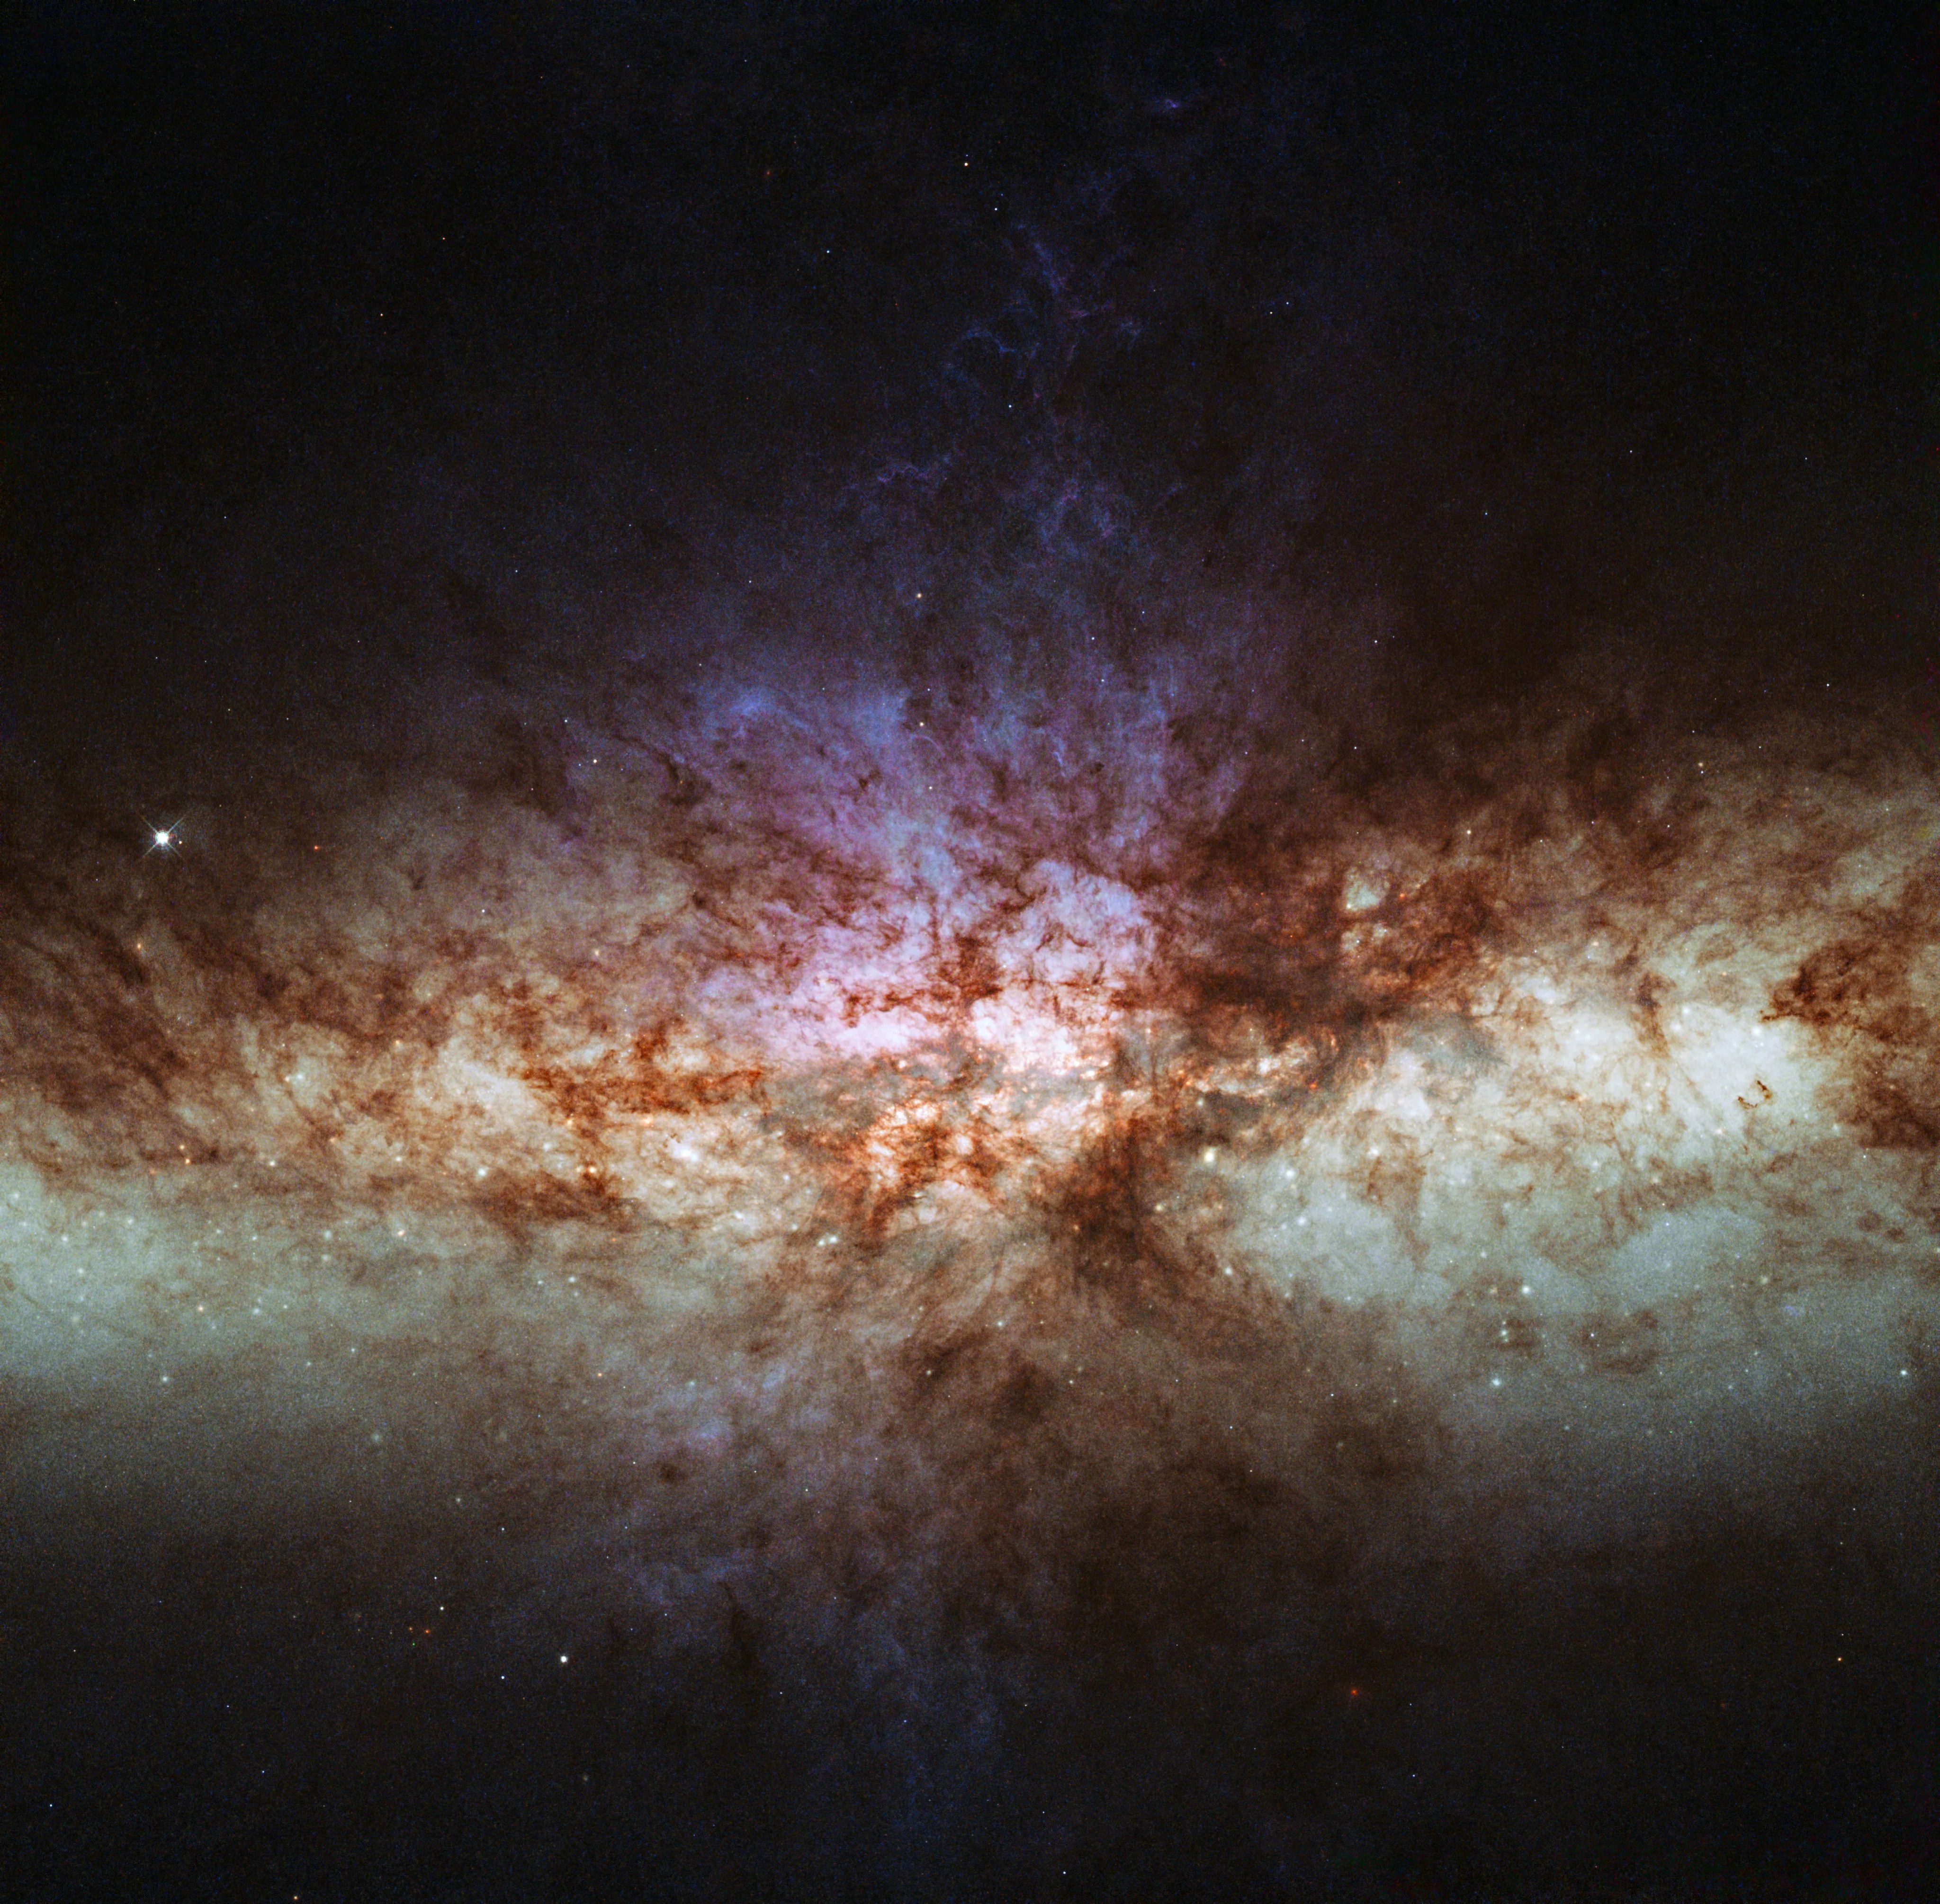 A bright glowing region in pale green and purple stretches across the image, laced through with dark brown lanes of dust and black space along the top and bottom.